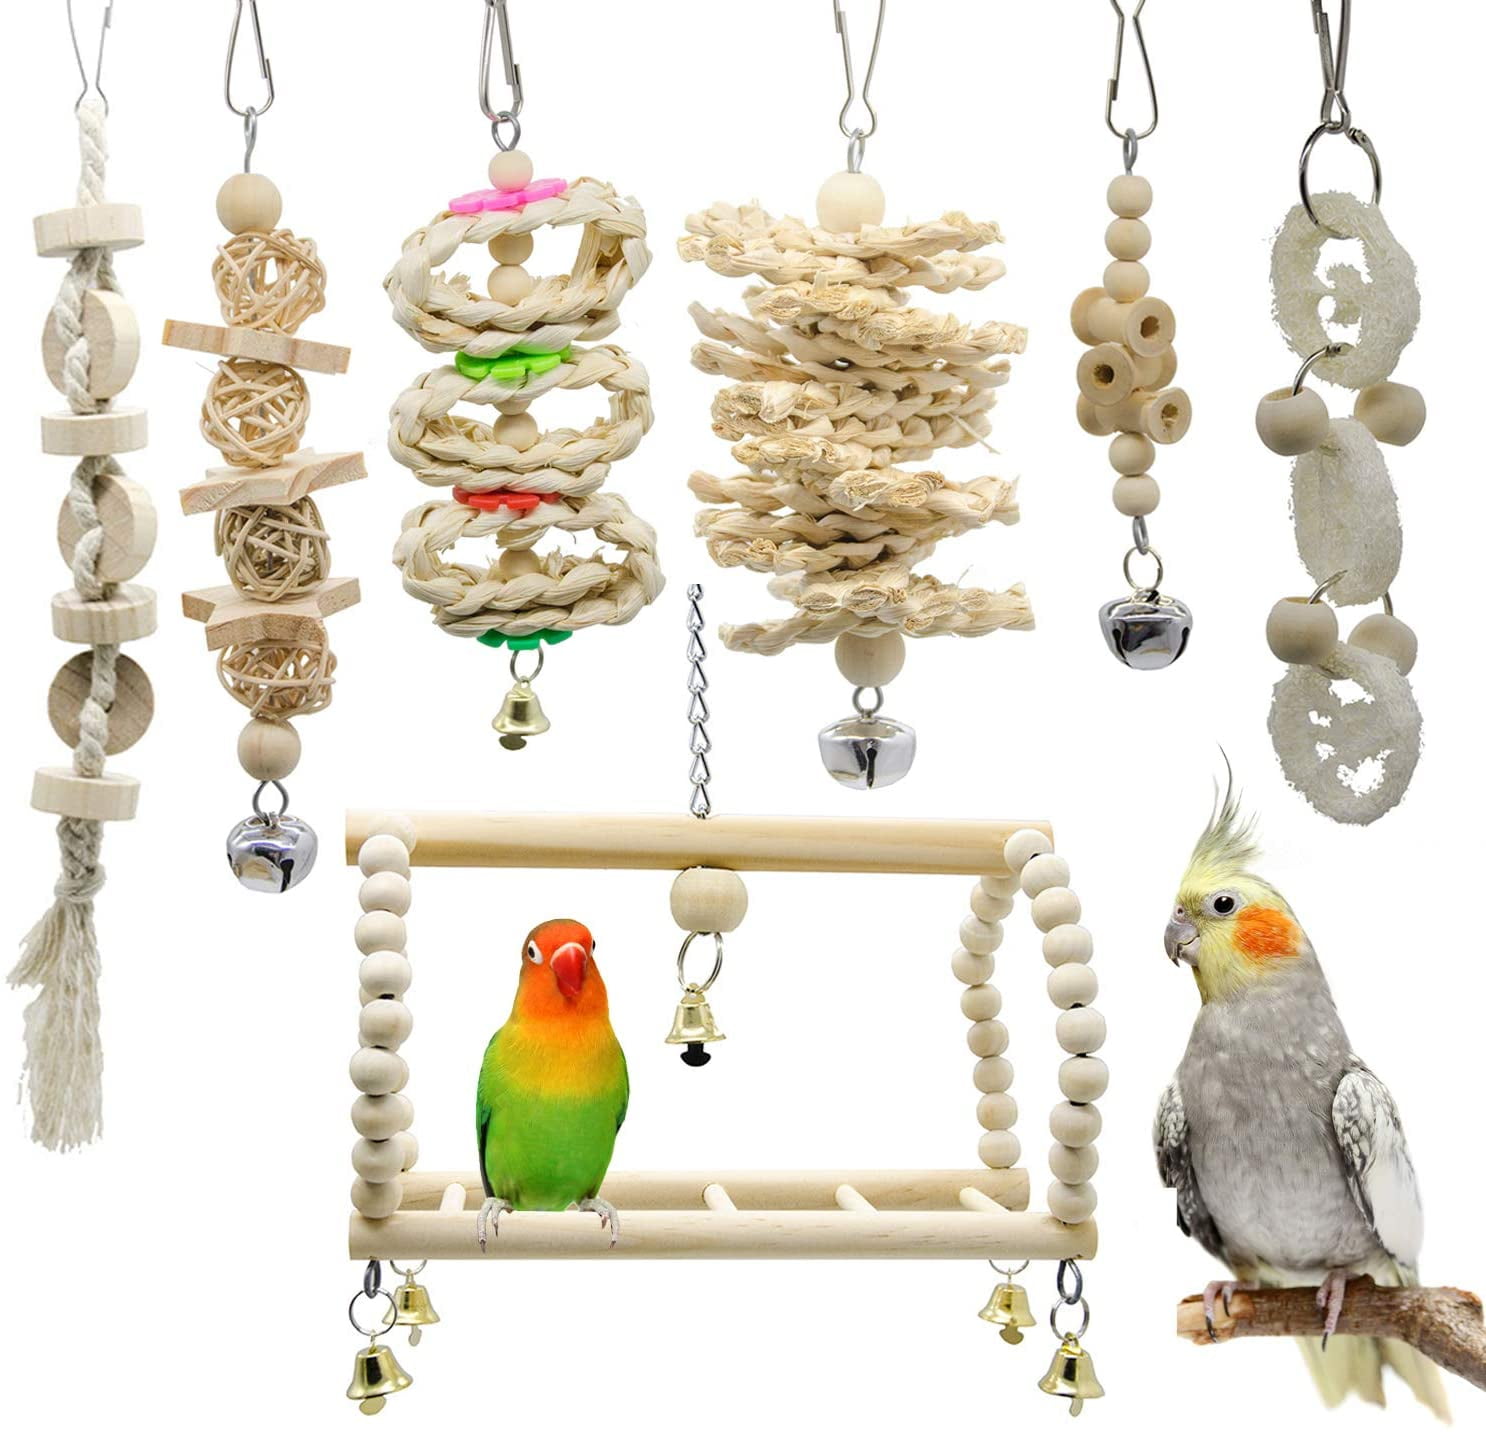 Cage Accessories Decorating Birdcage or Wood Parrot Perch Stand Play Gym for Small Medium Budgies Finches Conures QBLEEV Wooden Bird Swings Toy with Hanging Bells for Cockatiels Parakeets 